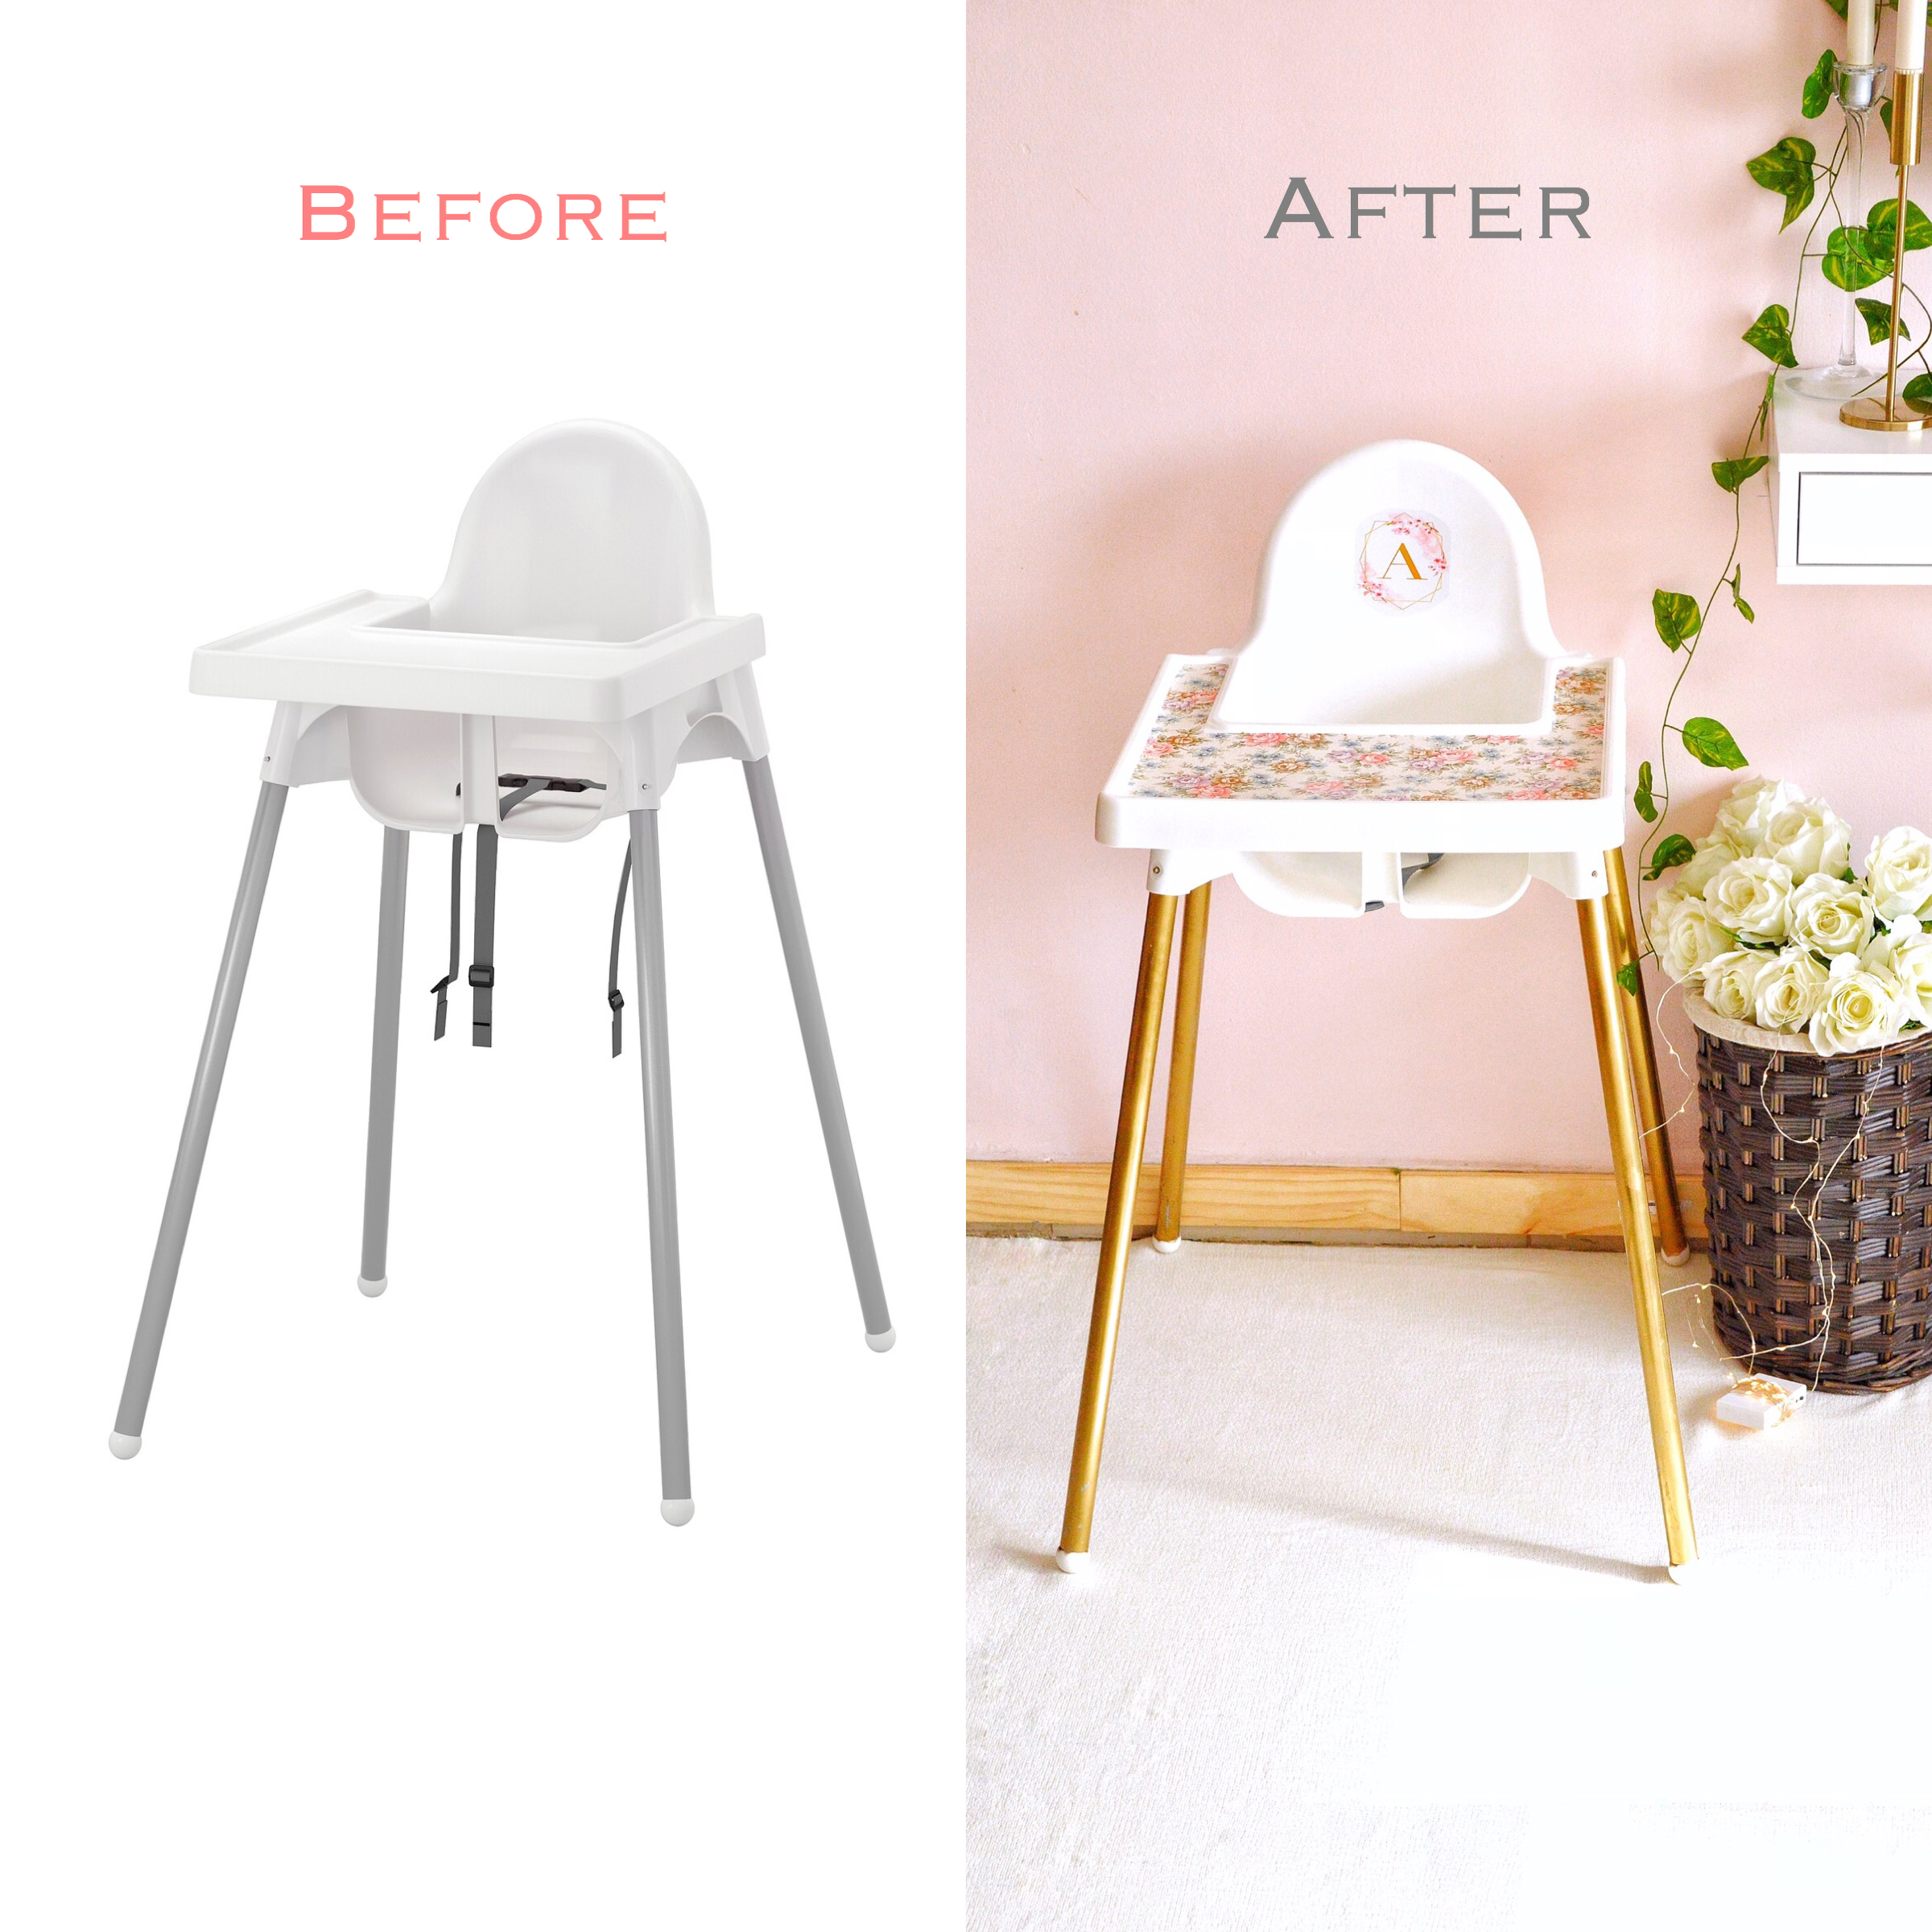 ikea baby table and chairs